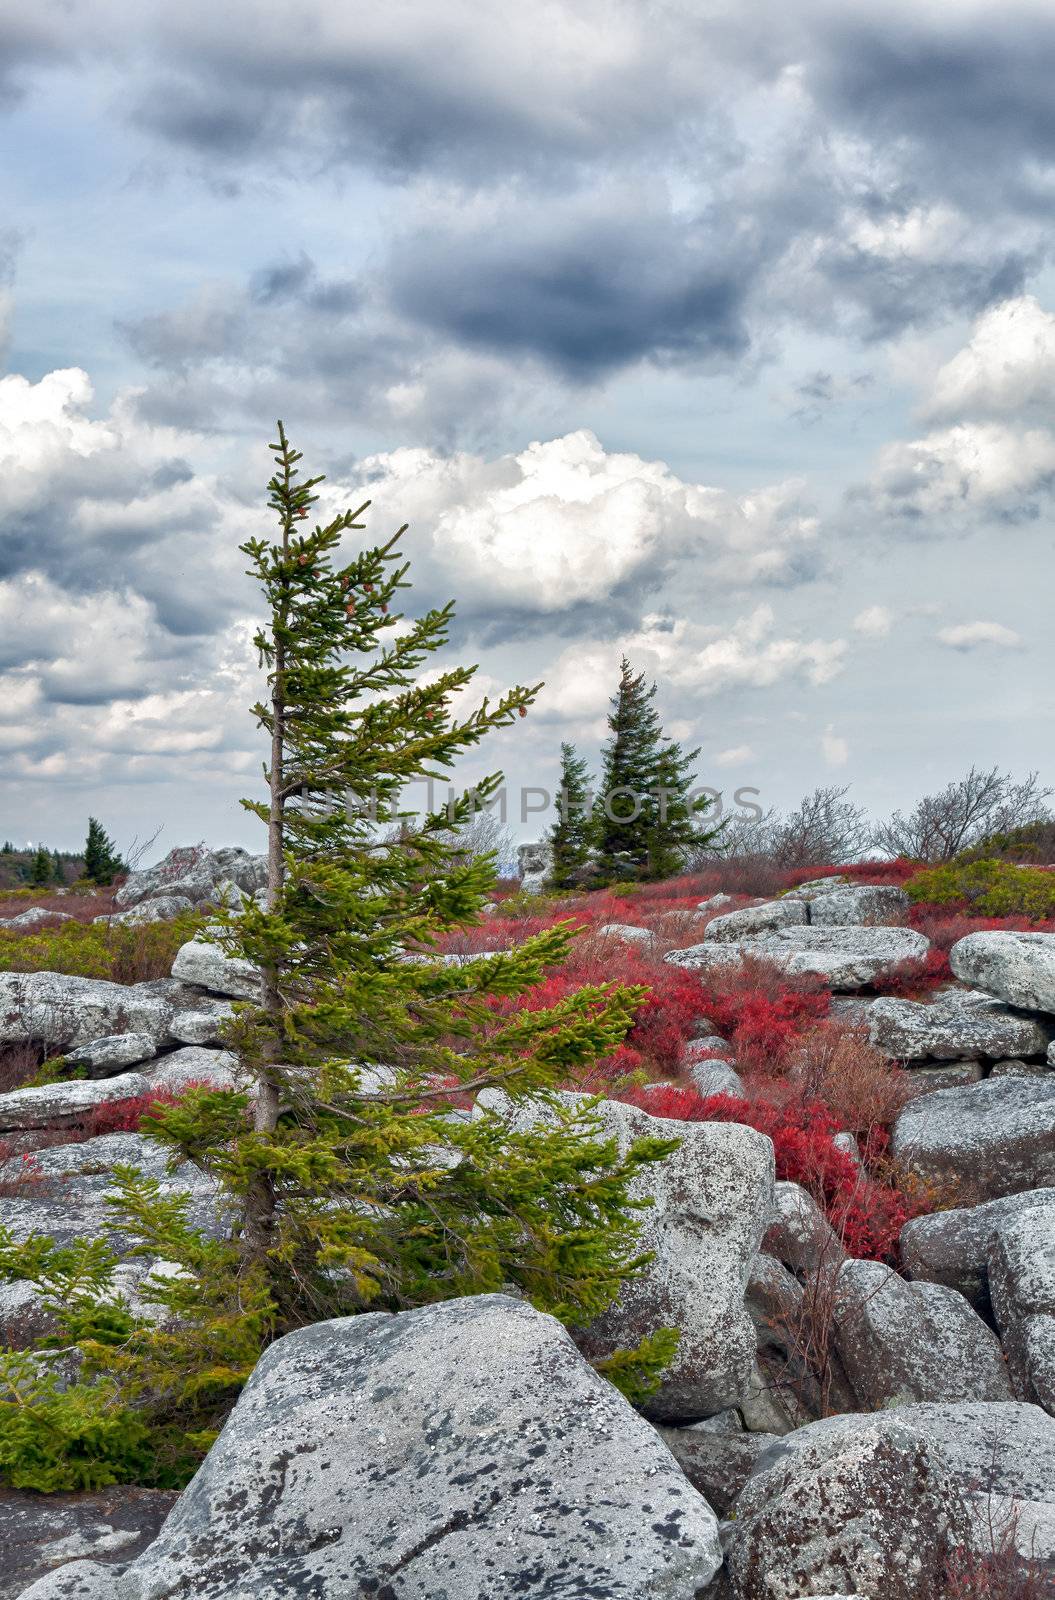 Pine tree battered by wind on mountain top and growing among blueberry plants and large boulders